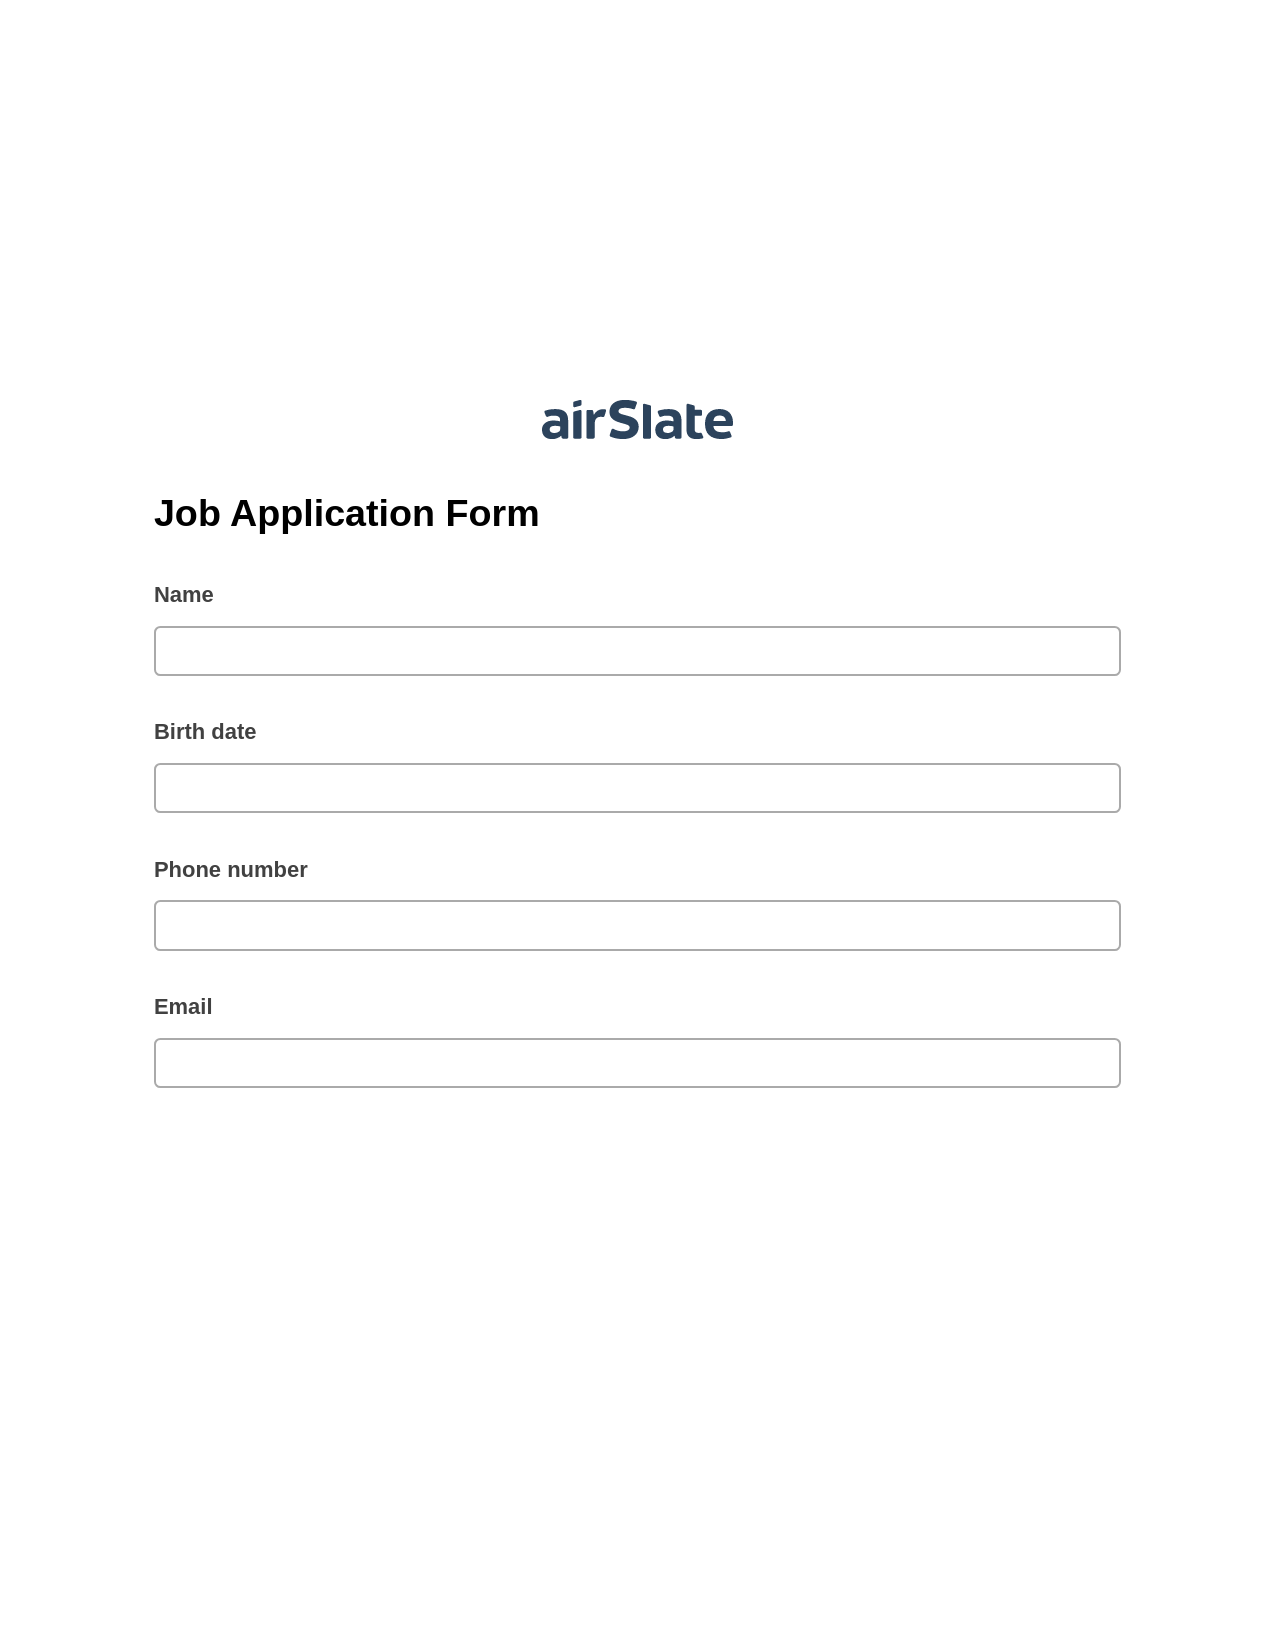 Job Application Form Pre-fill from Excel Spreadsheet Bot, Lock the slate bot, Box Bot